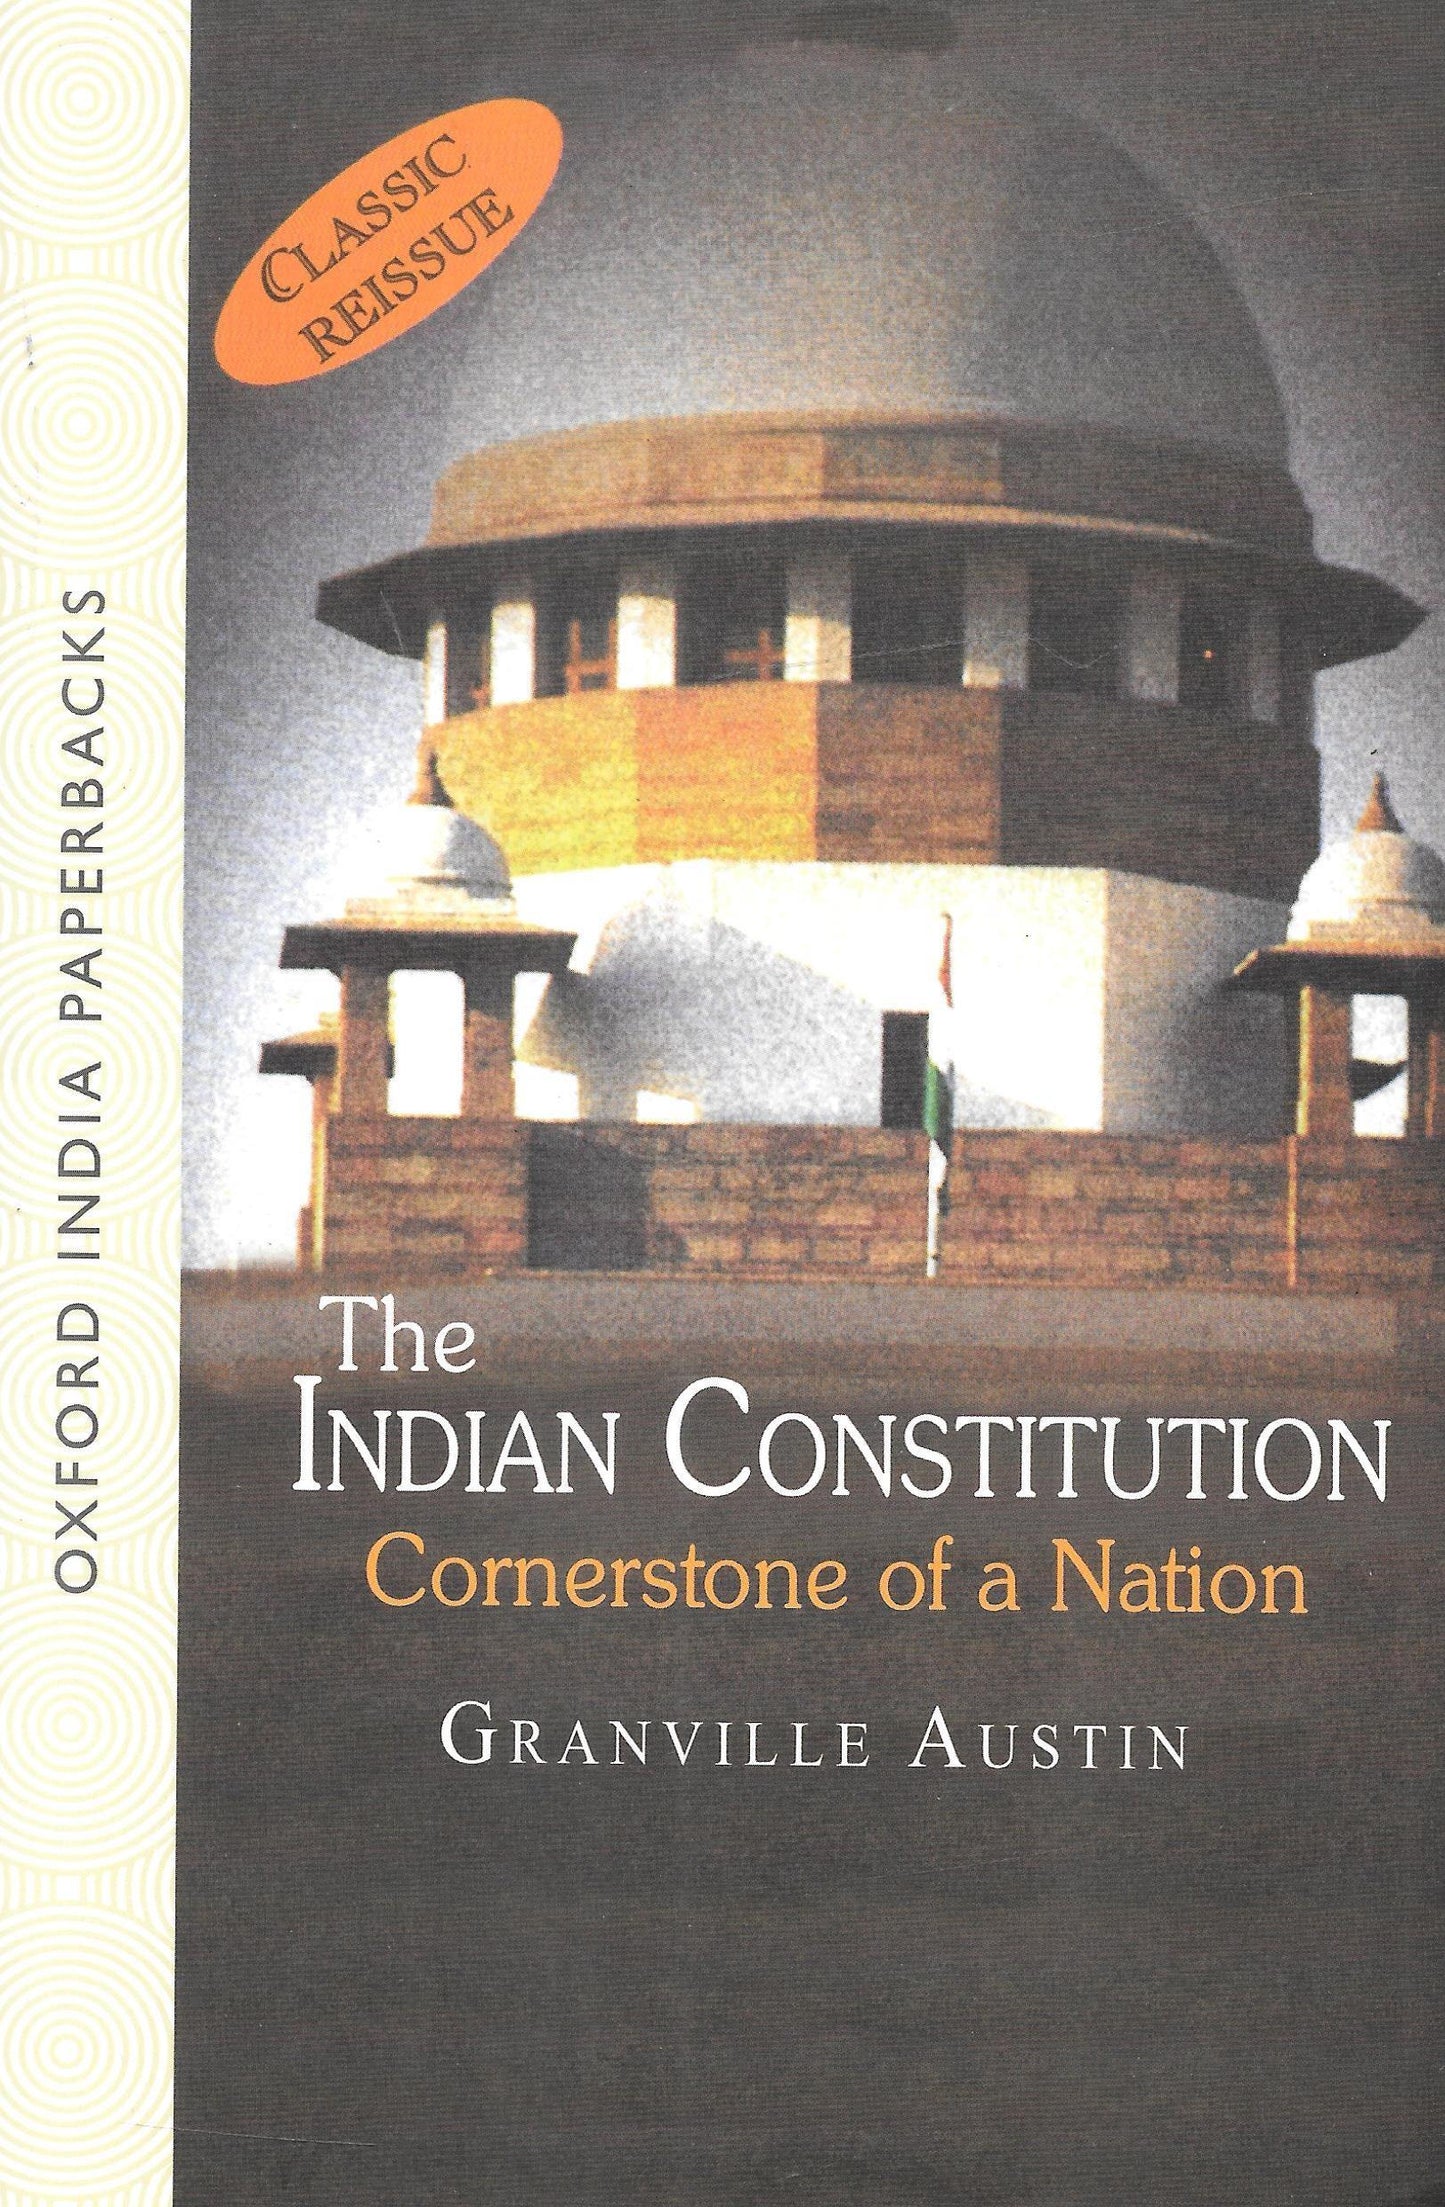 The Indian Constitution - Cornerstone of A Nation